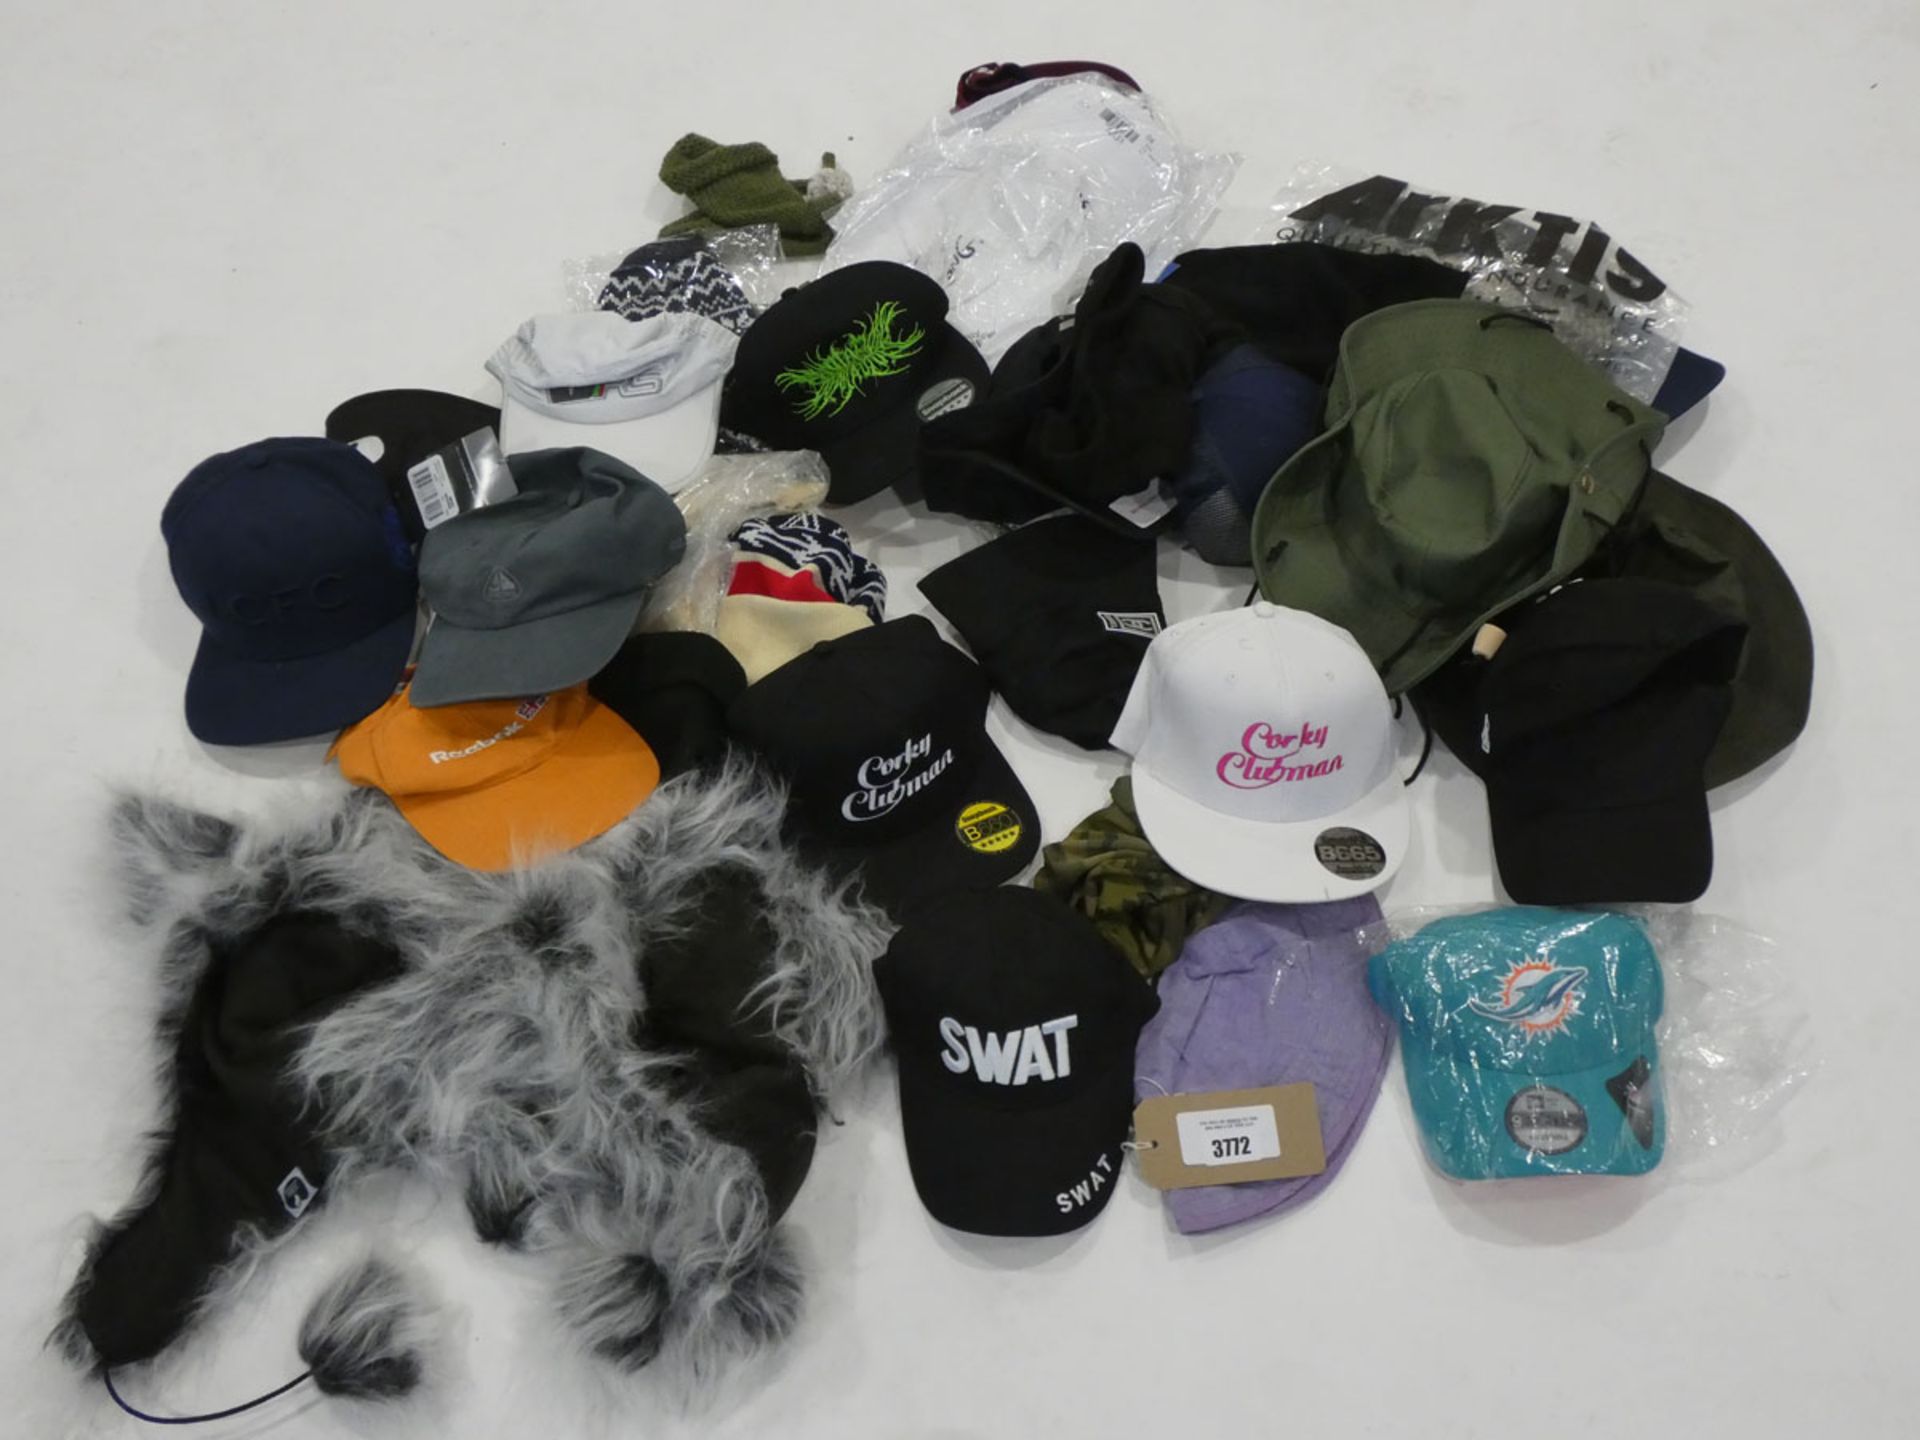 Large selection of mixed ladies and men's hats